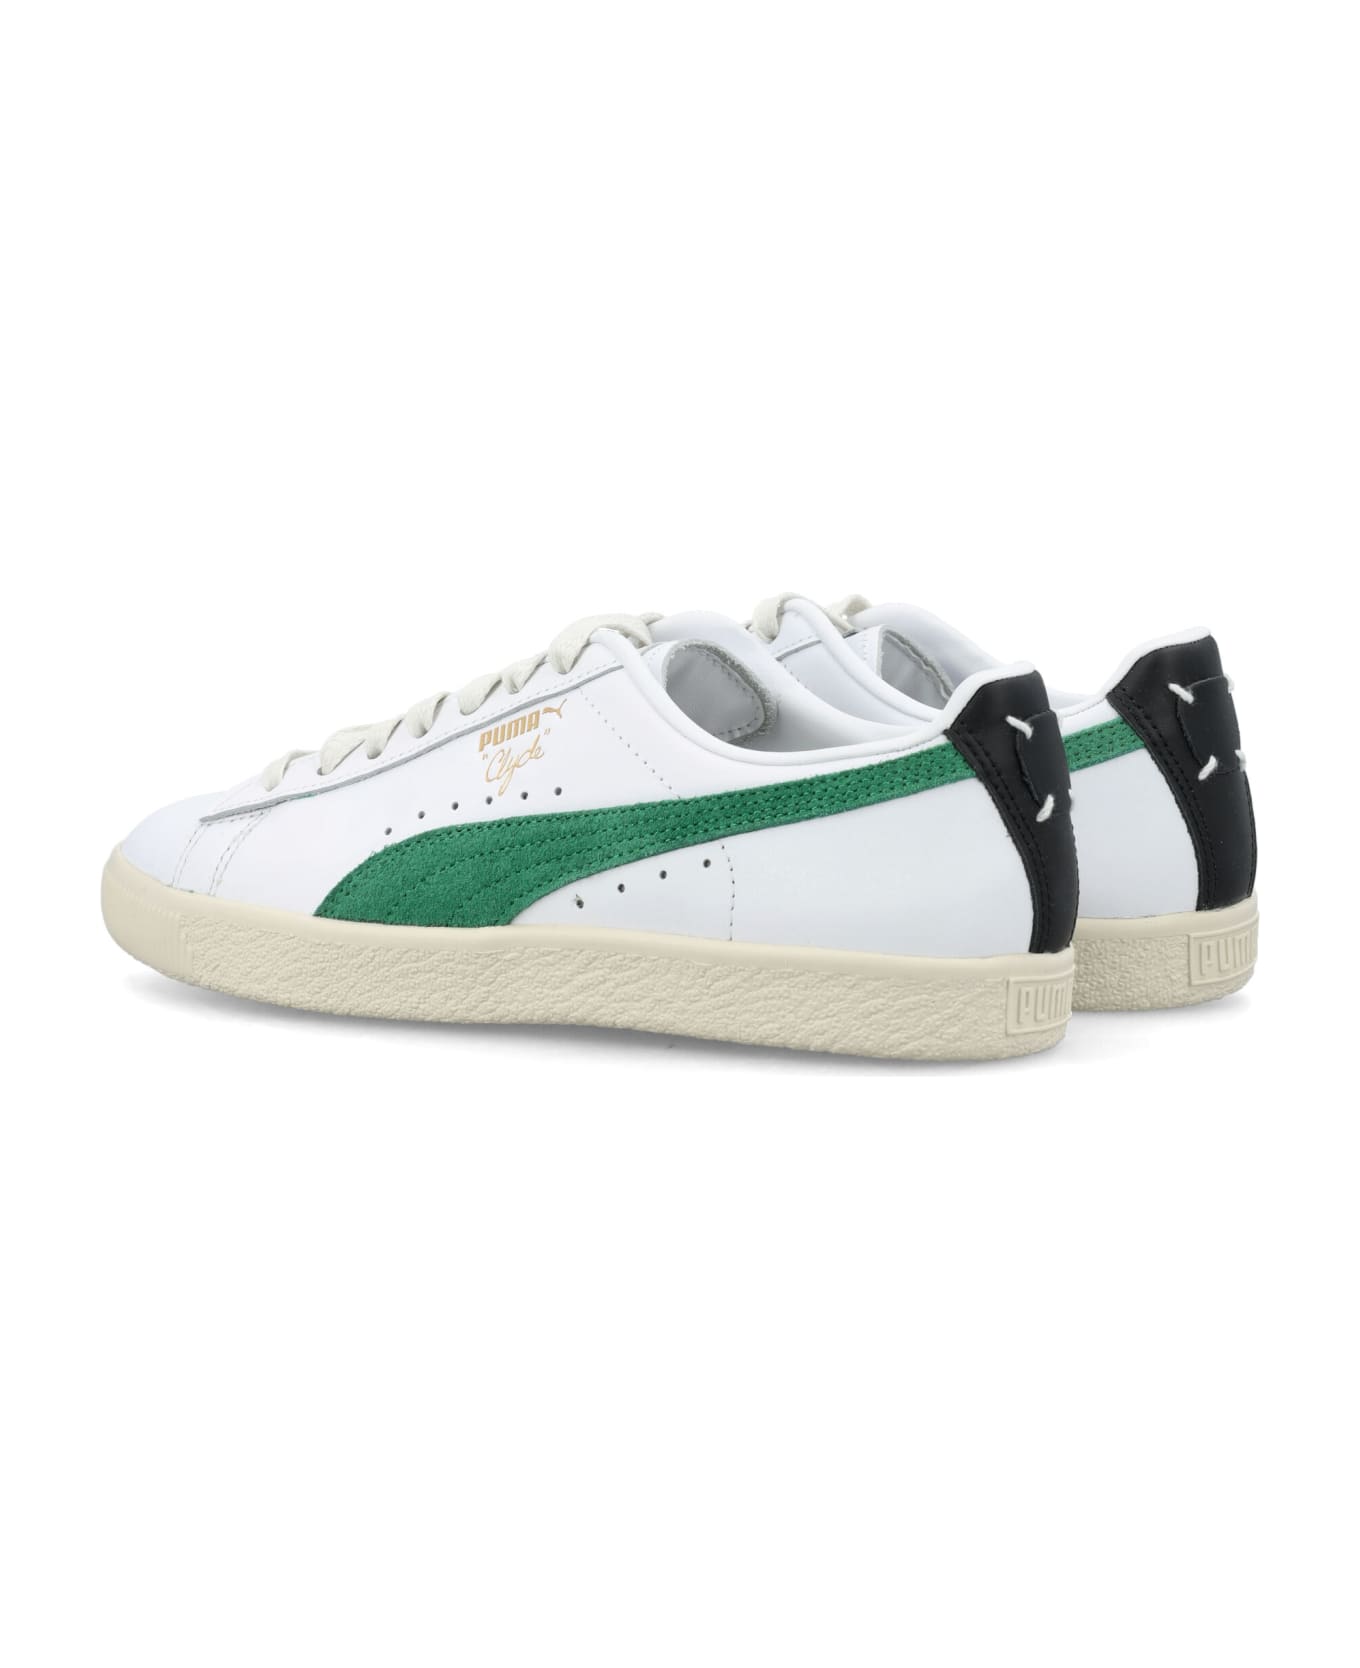 Puma Clyde Base - WHITE ARCHIVE GREEN